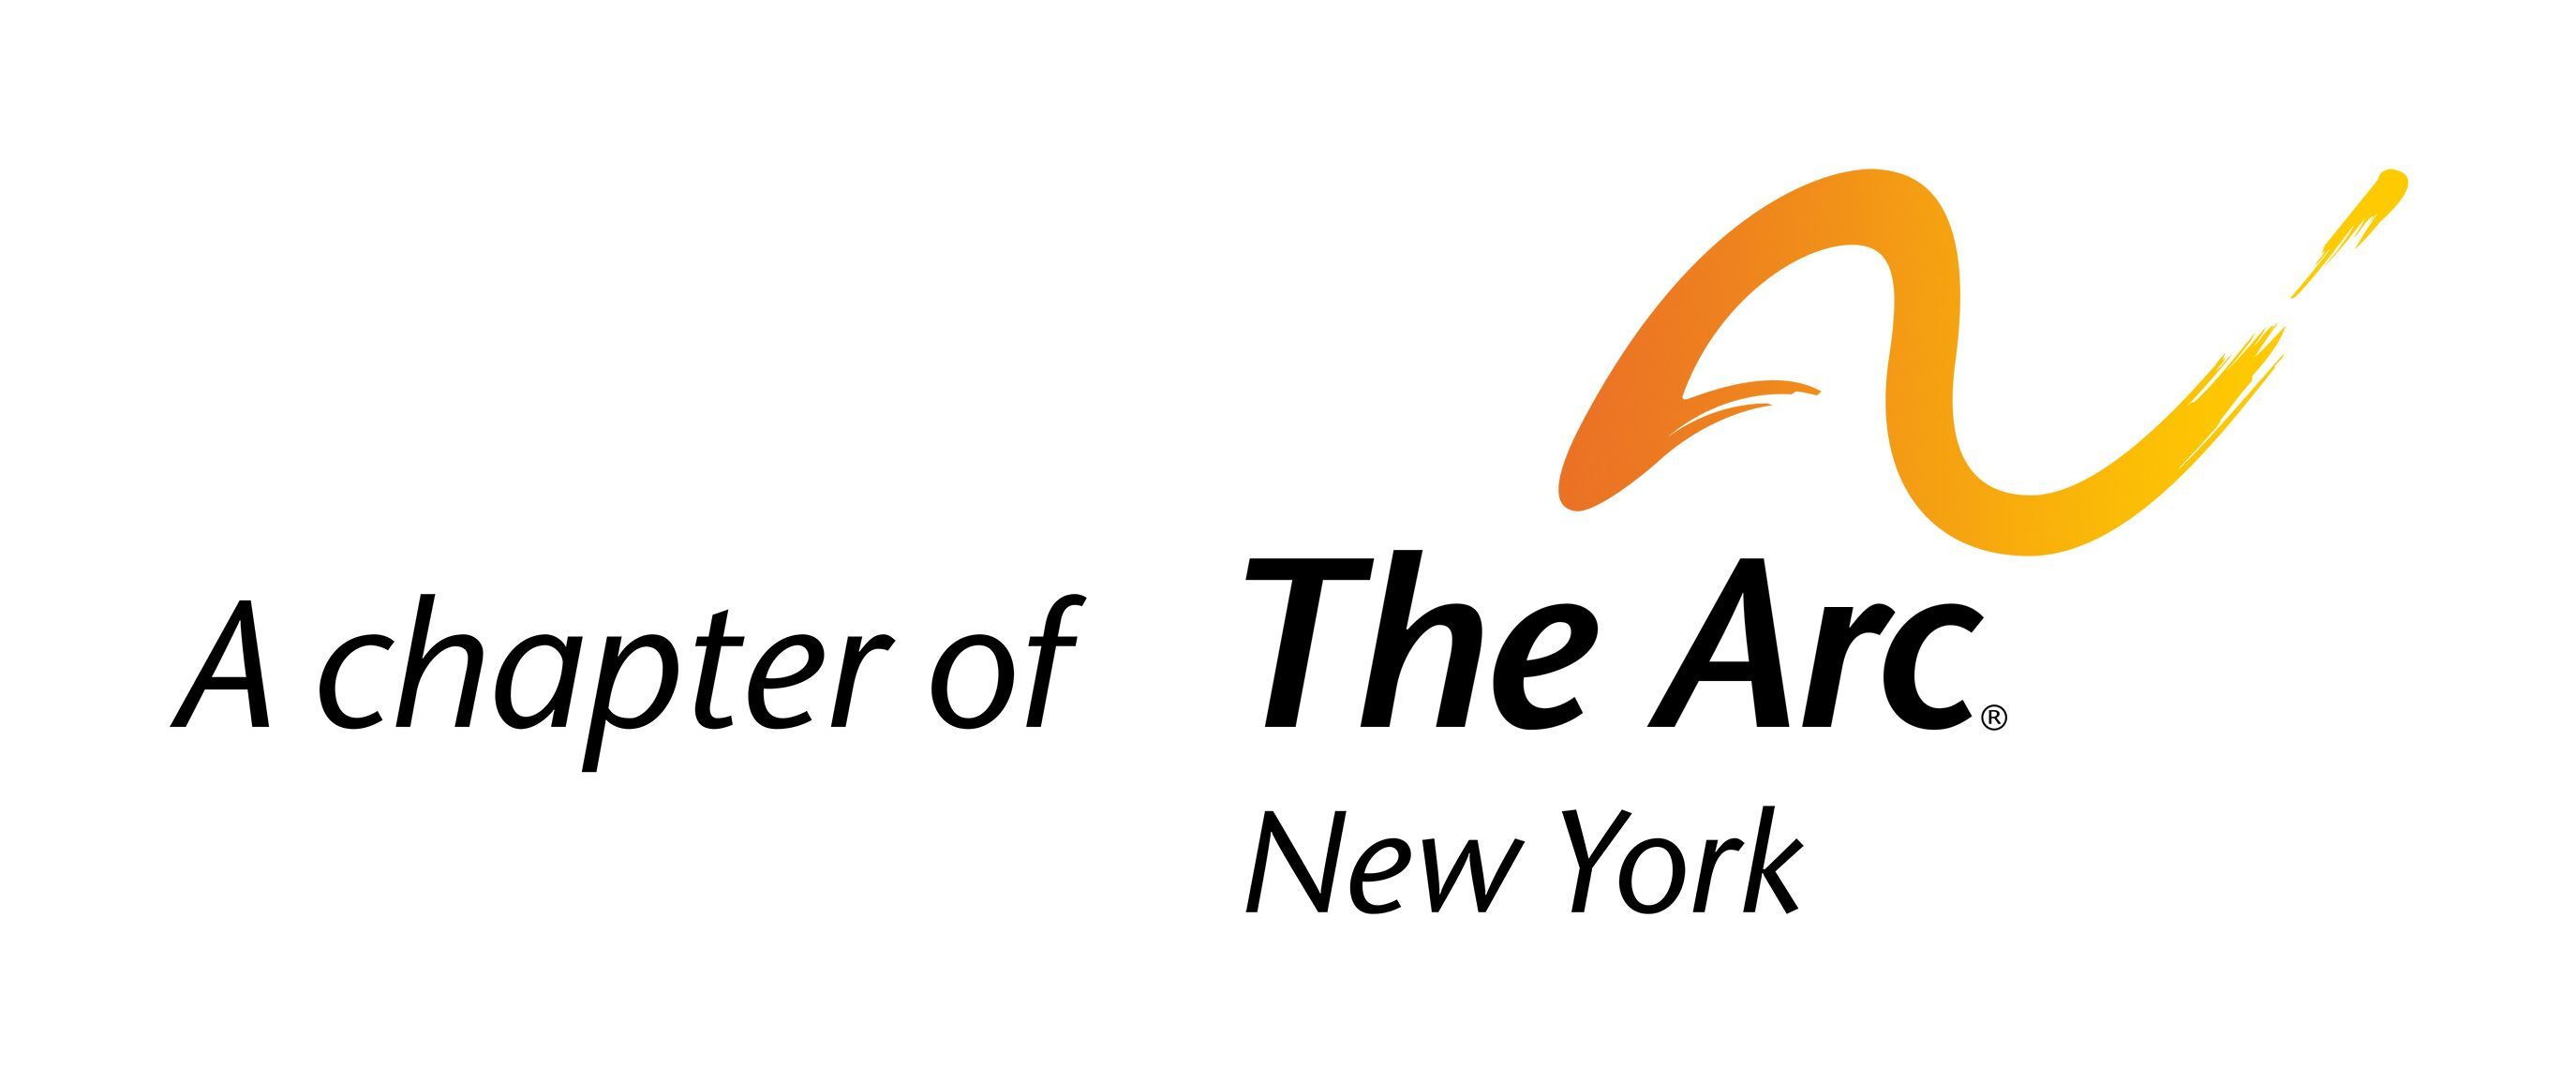 The Arc Greater Hudson Valley is a Chapter of The Arc New York